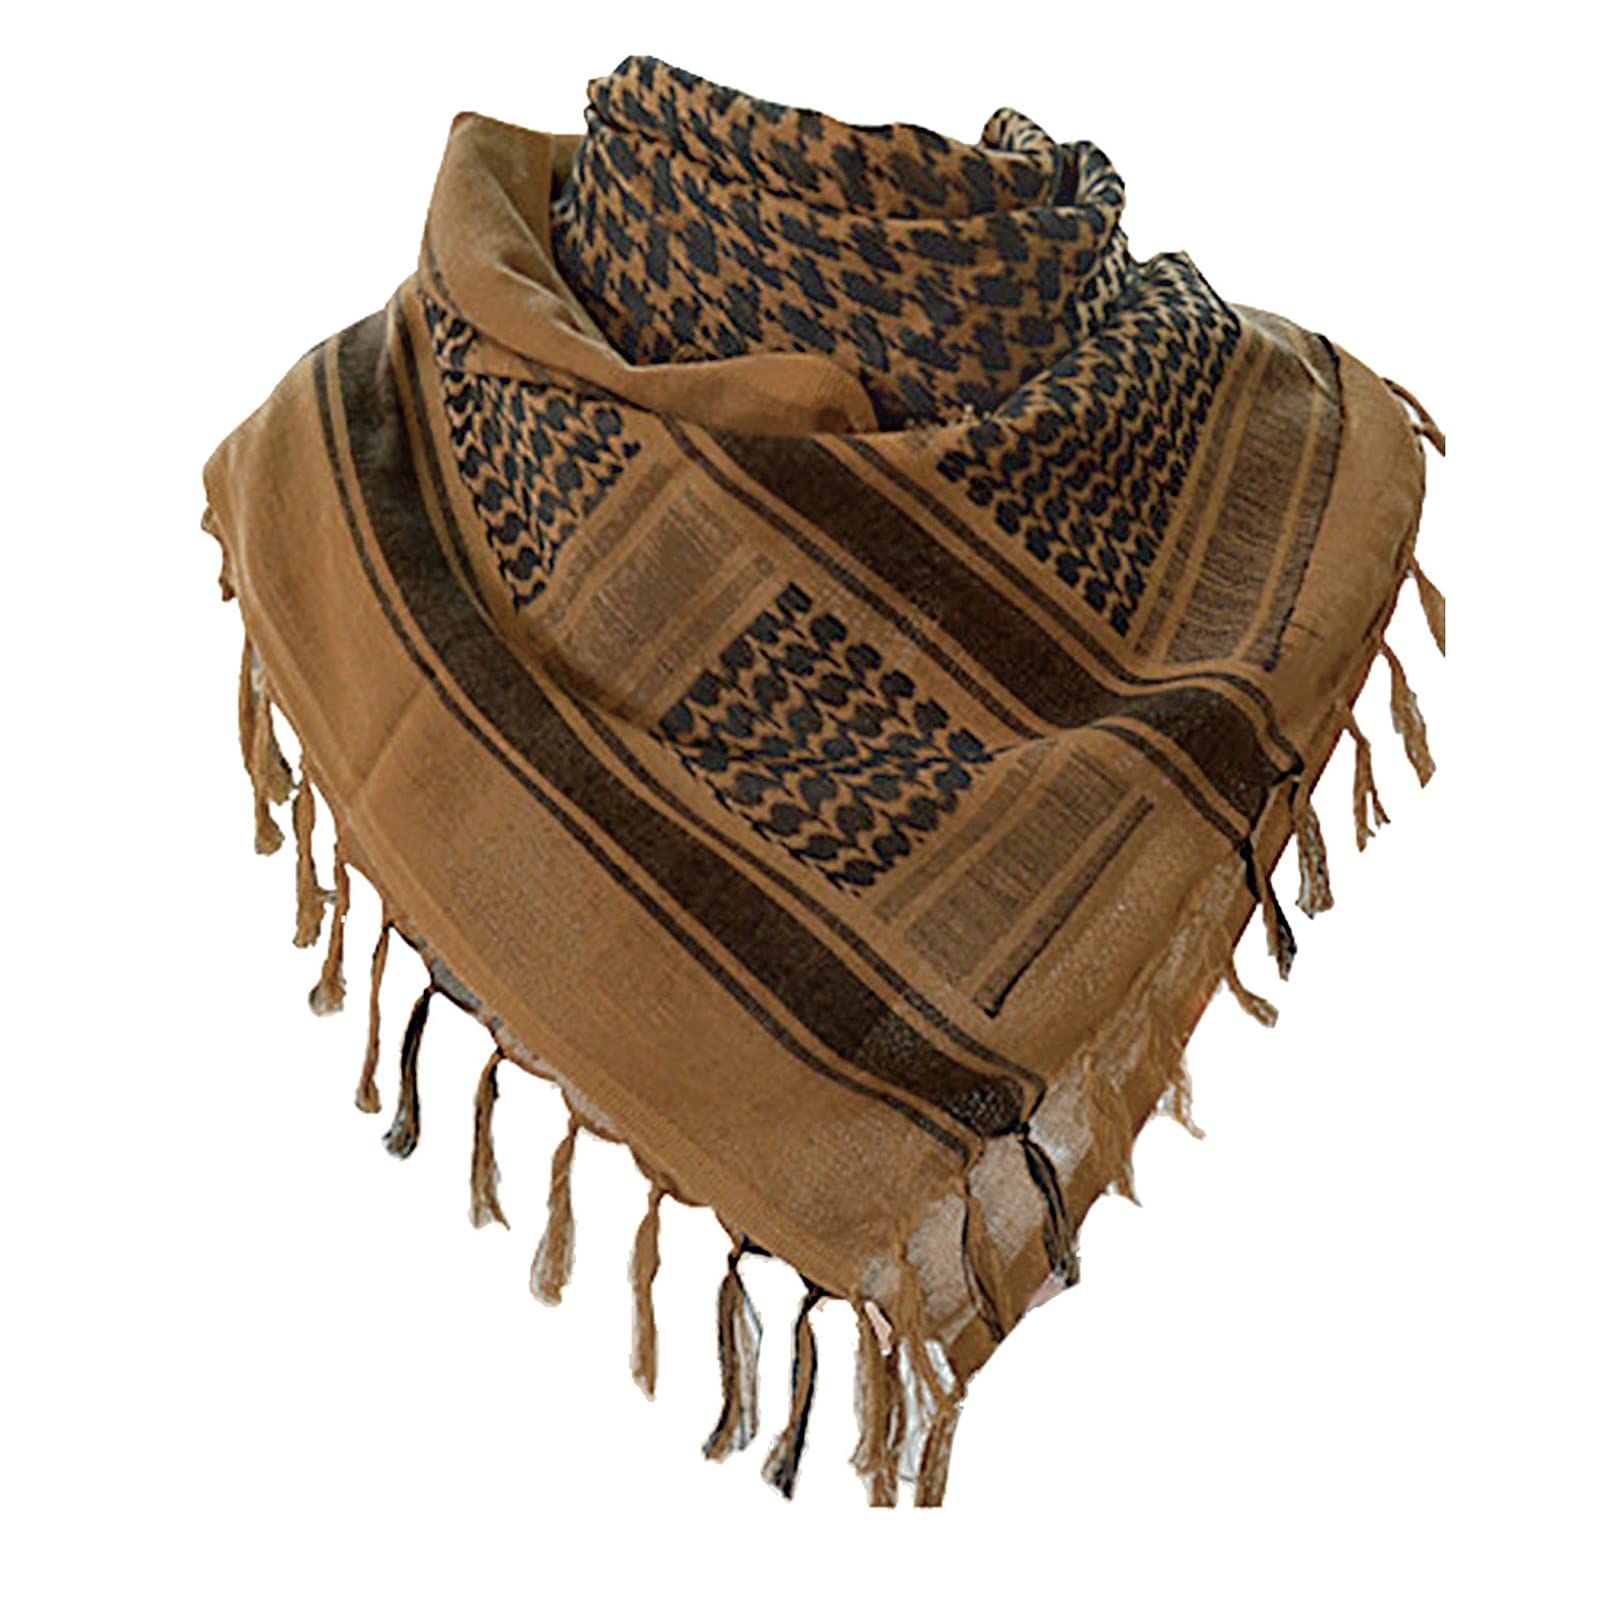 Buy Solid Plain Black Shemagh Tactical Desert Scarf Keffiyeh at